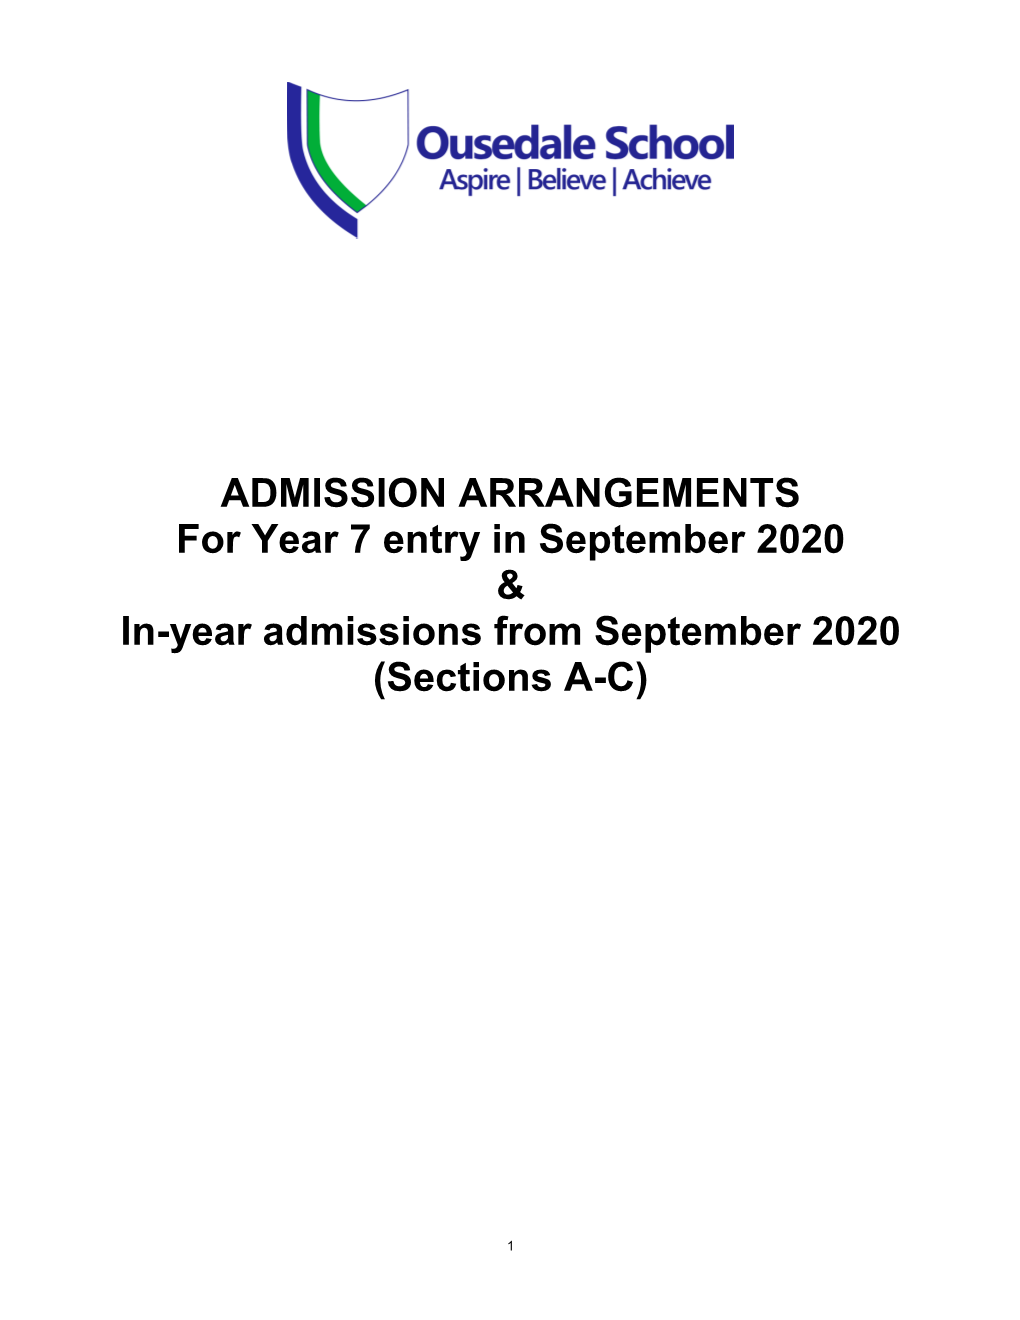 ADMISSION ARRANGEMENTS for Year 7 Entry in September 2020 & In-Year Admissions from September 2020 (Sections A-C)